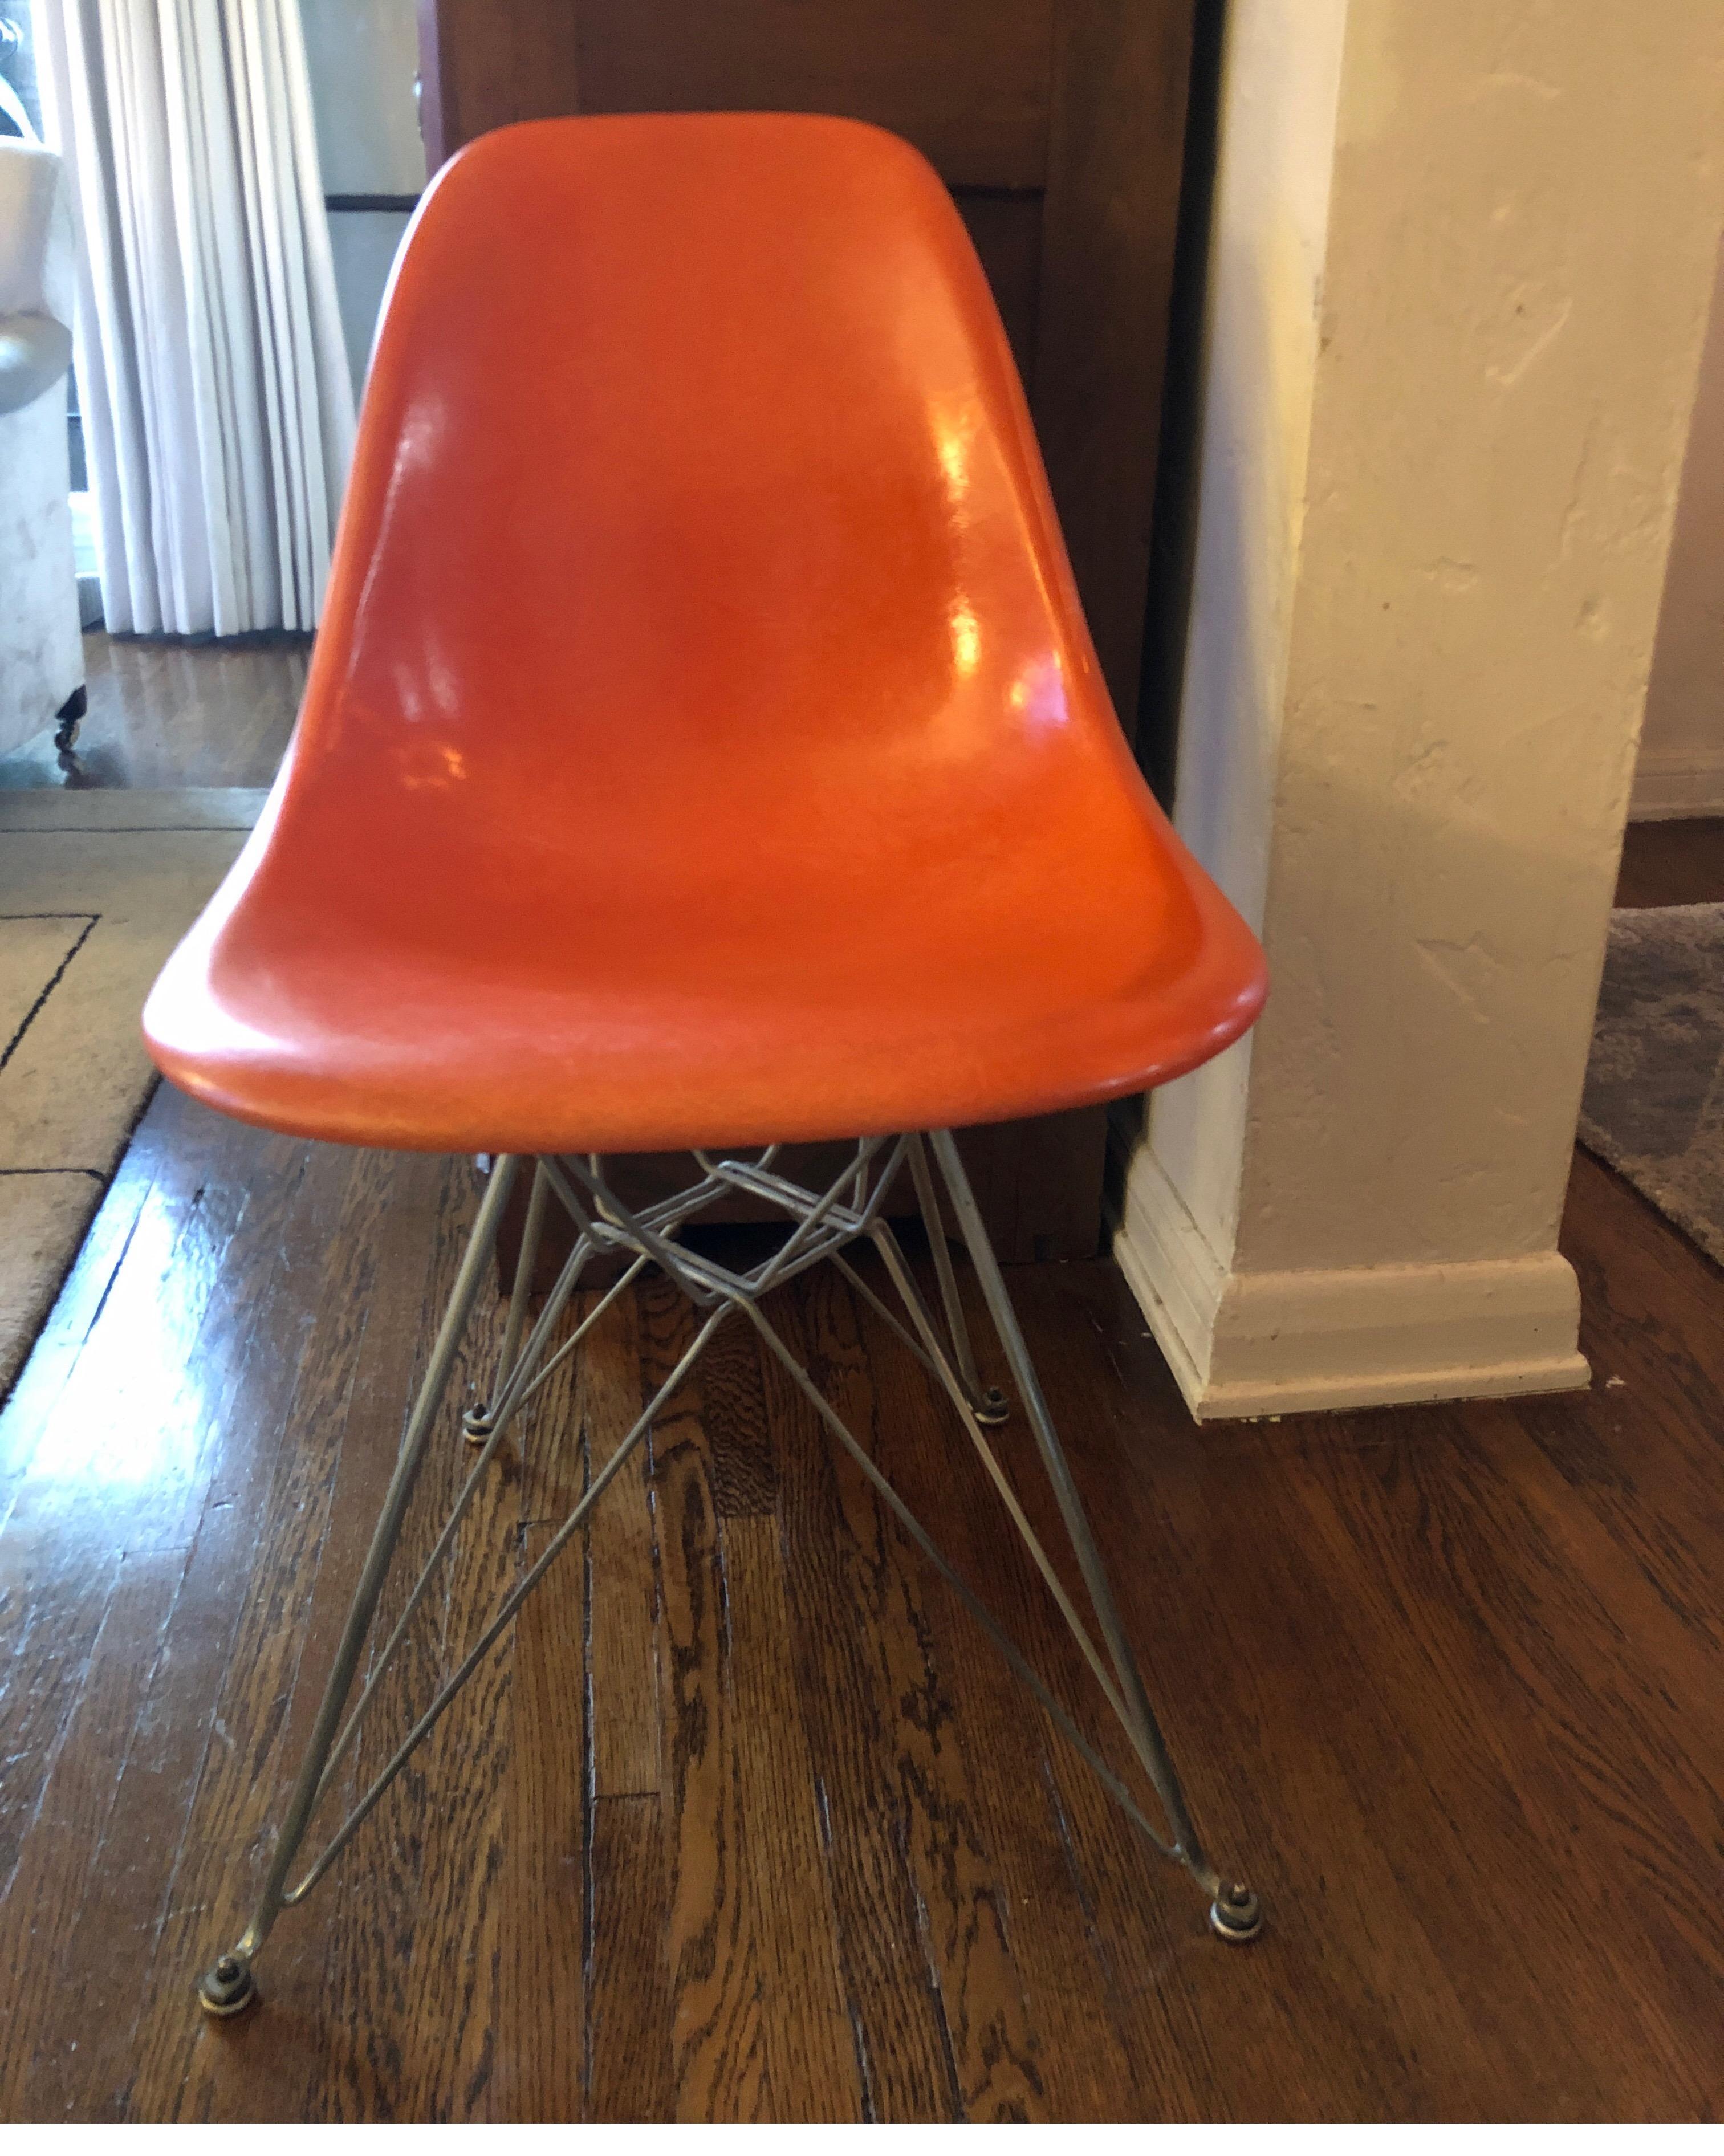 Vintage Herman Miller fiberglass shell chair. 
Burnt orange with original steel base. 

1970s

No stress cracks. Great condition consistent with age.